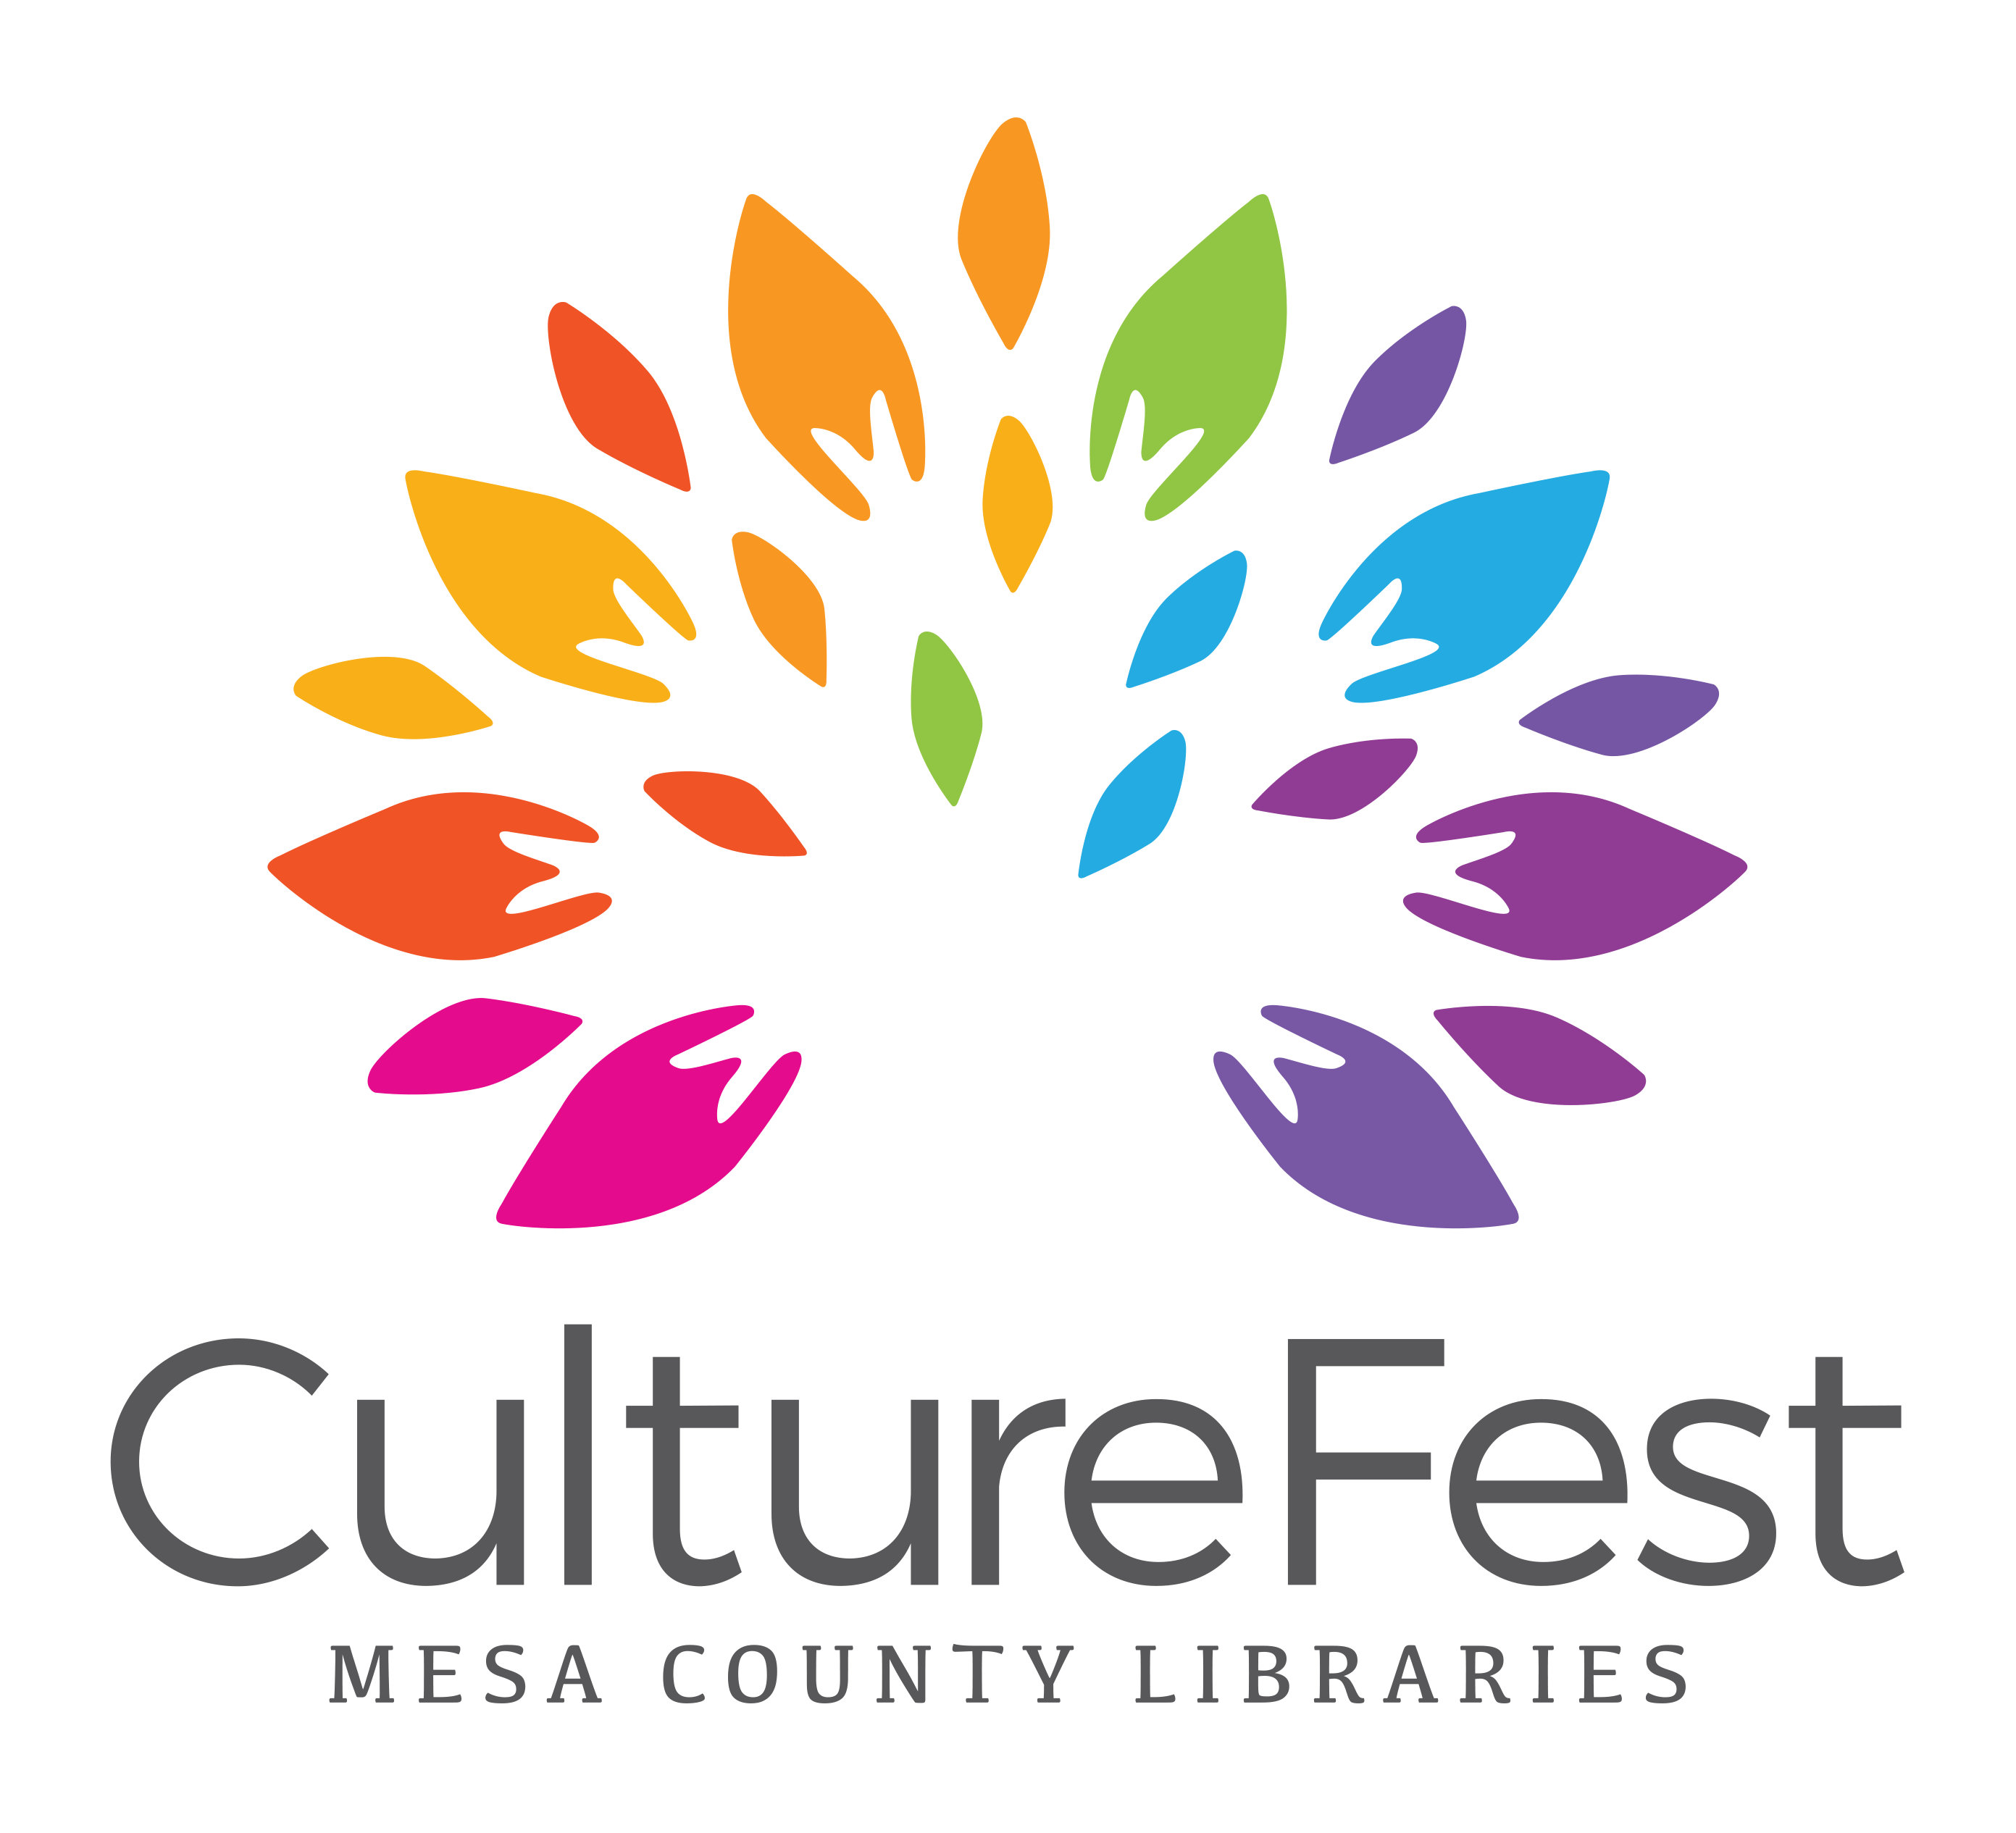 Fest Logo - Library seeks talented performers for 2019 Culture Fest – Mesa ...